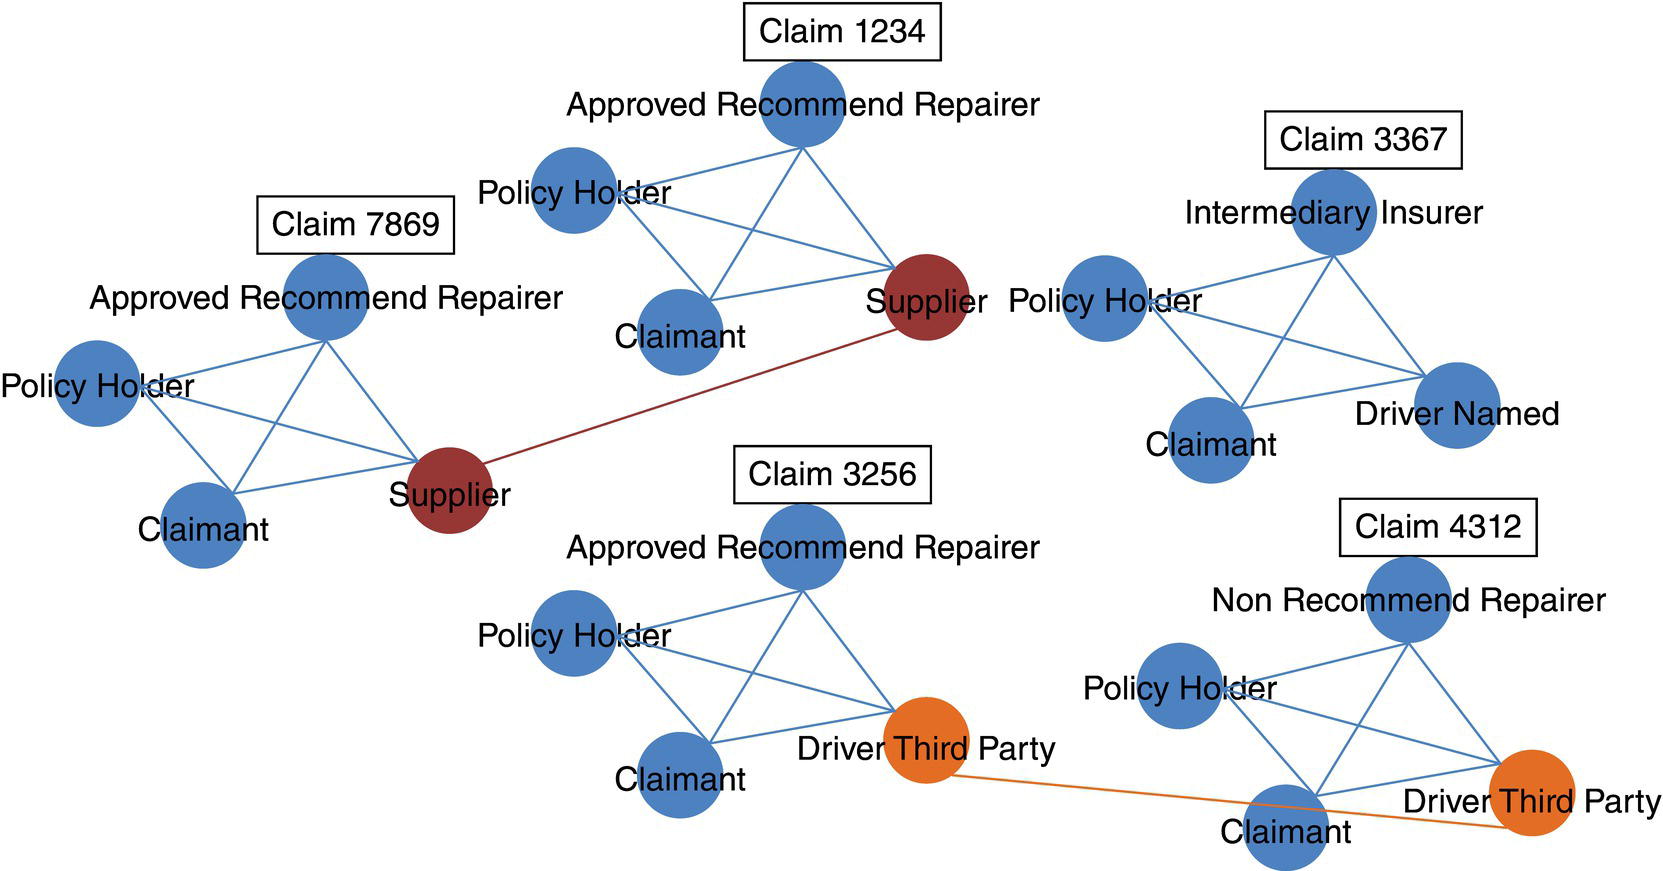 Schematic illustration of relationships between claims due to same participants.